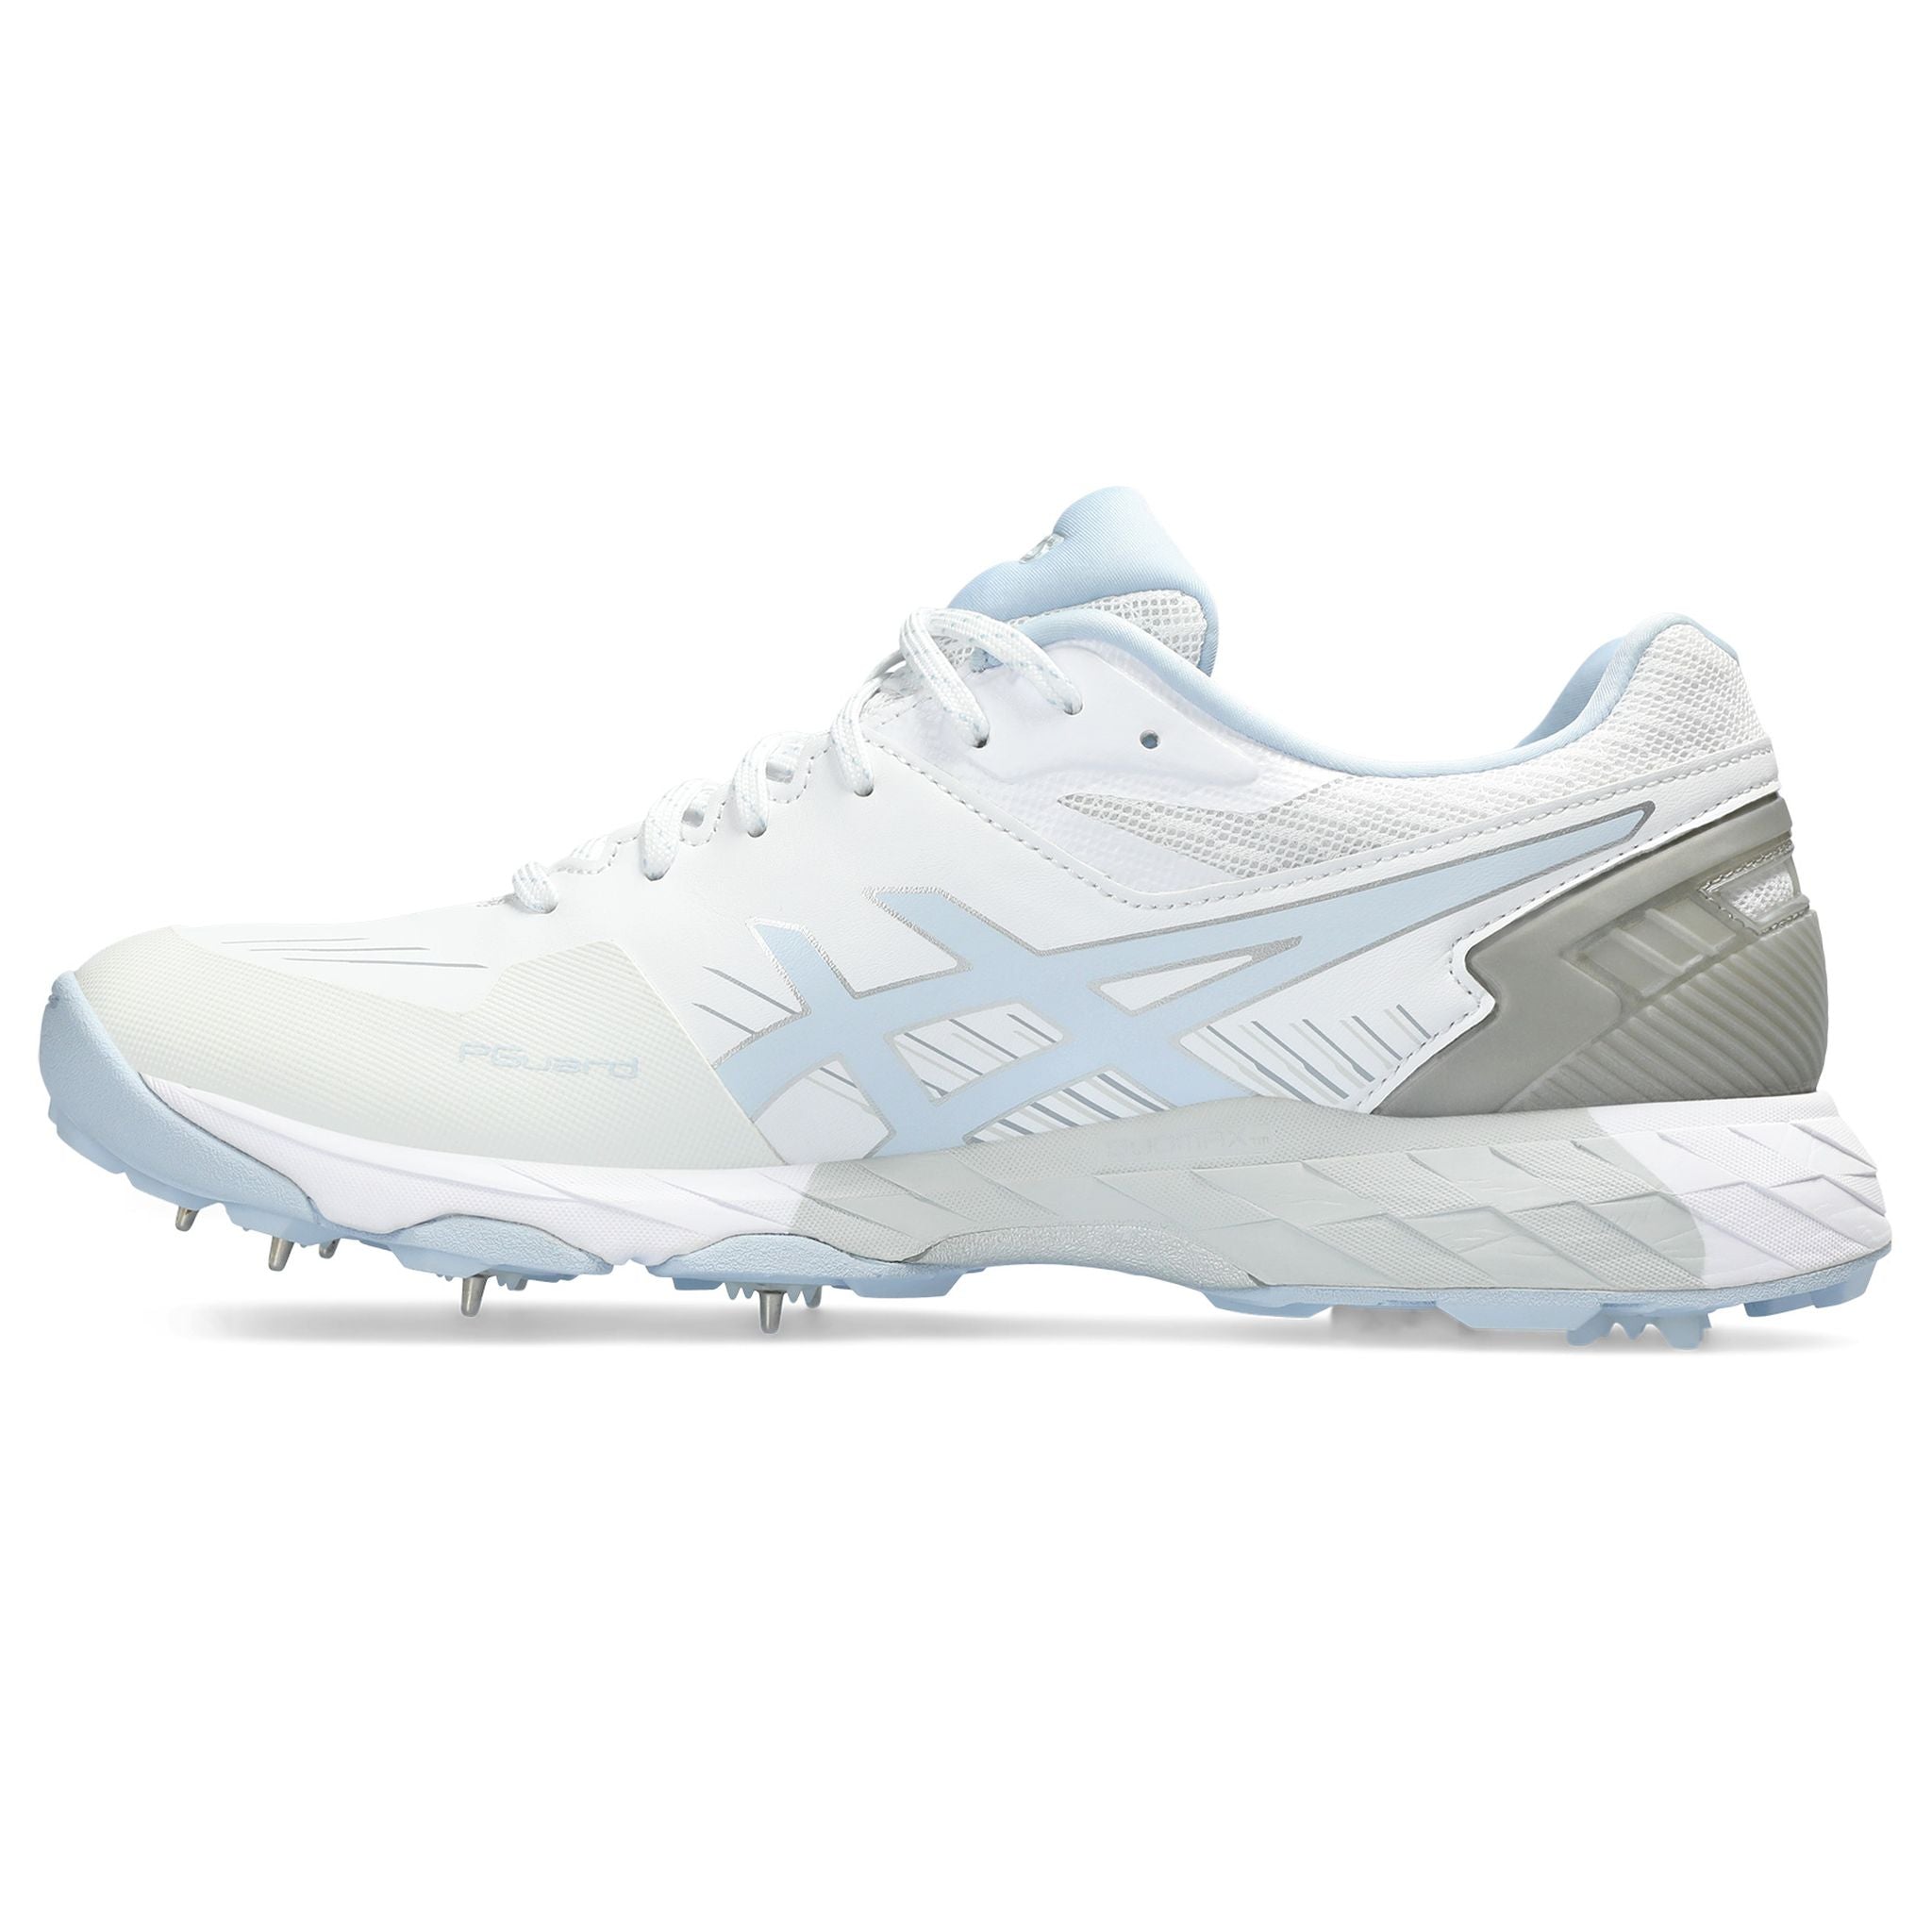 ASICS 350 Not Out FF Womens Cricket Shoe